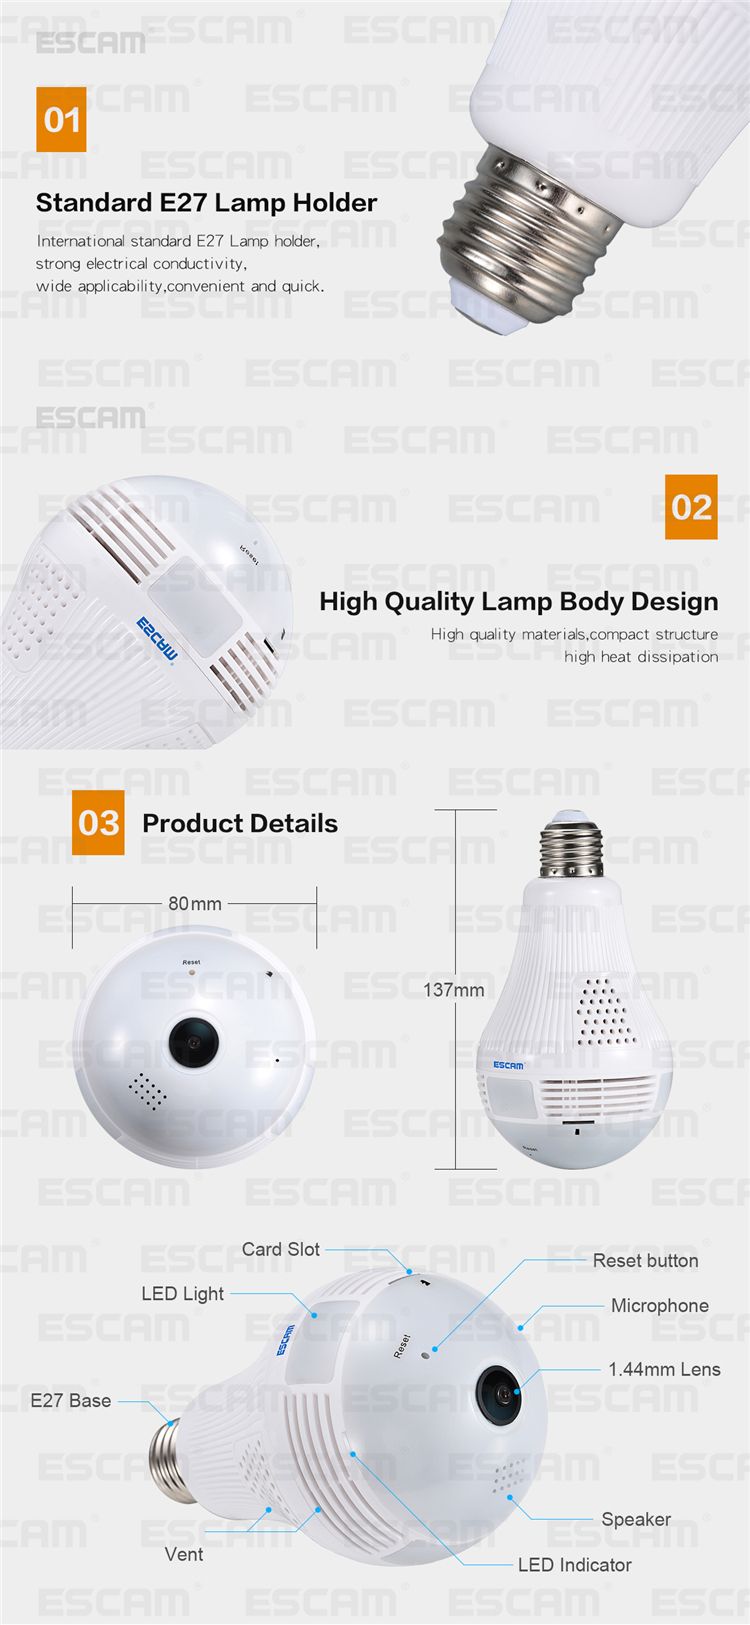 ESCAM-QP136-960P-Bulb-WIFI-IP-Security-Camera-360-Degree-Panoramic-H264-Infrared-Indoor-Mootion-Dete-1213117